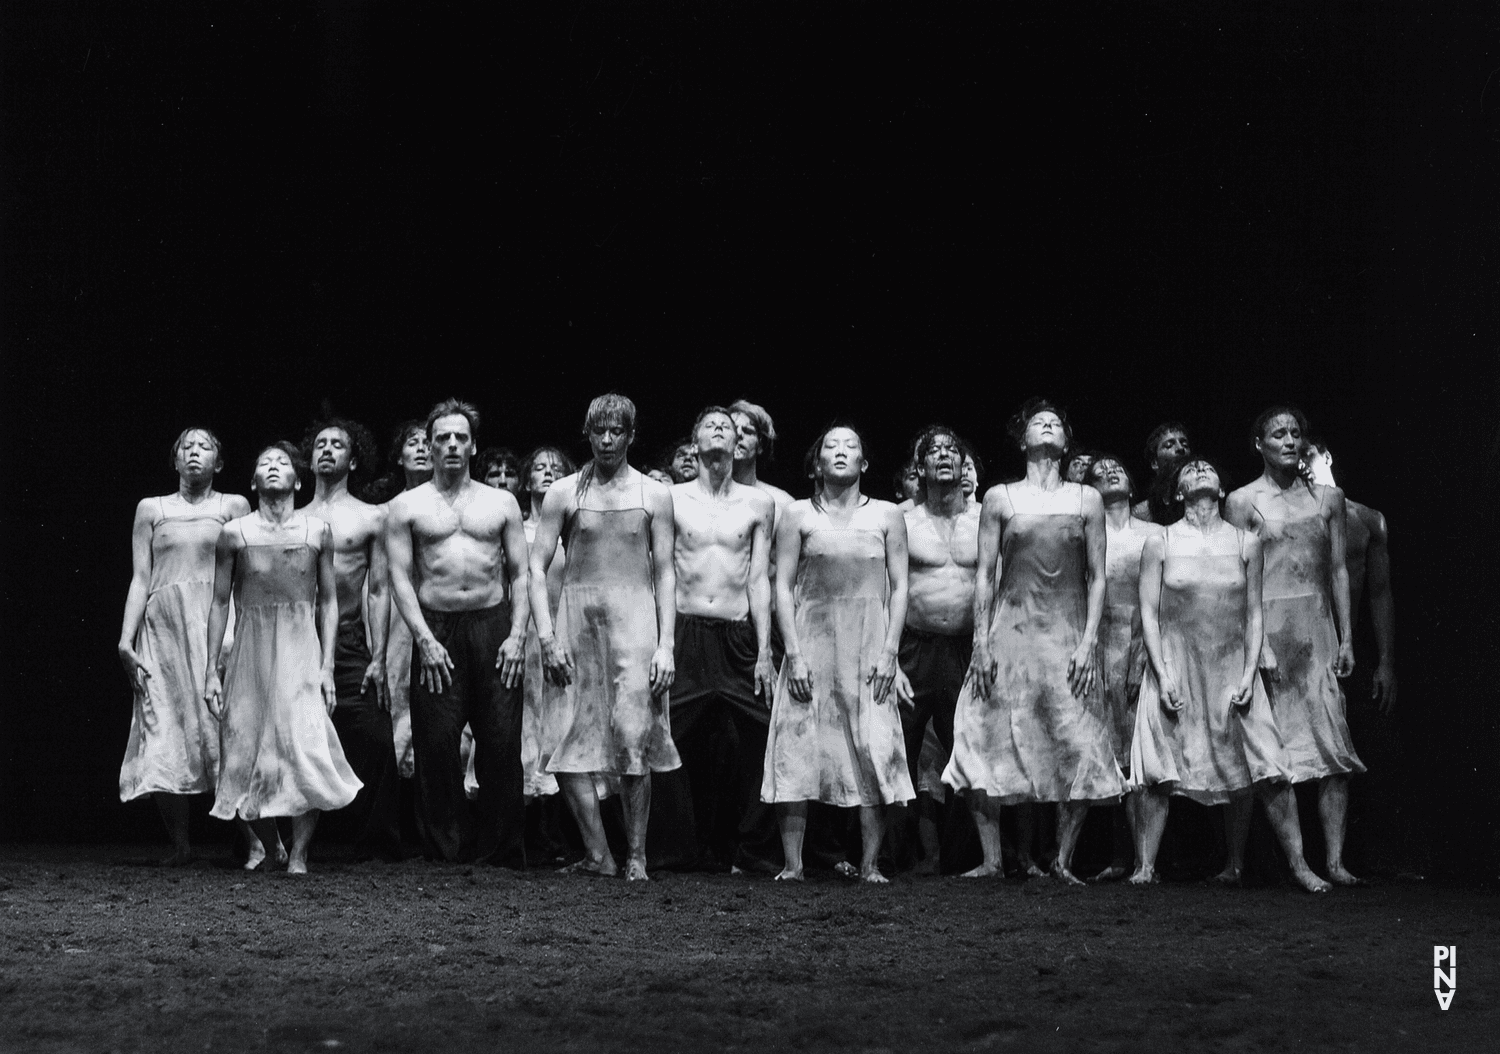 “The Rite of Spring” by Pina Bausch, Sept. 5, 2007